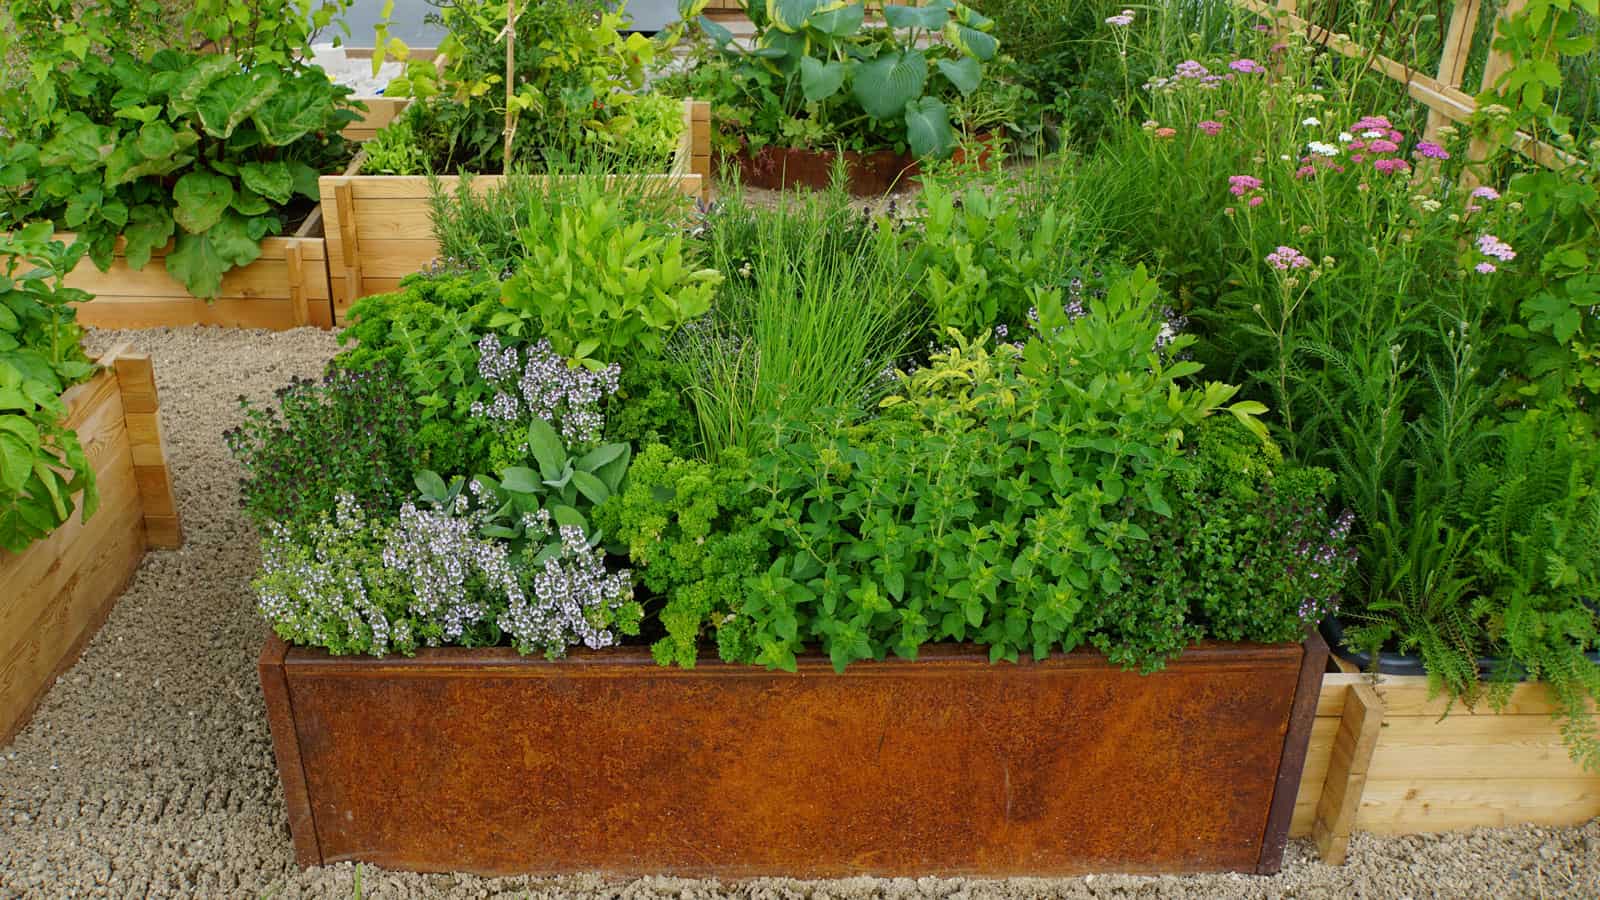 A planter box filled with herbs